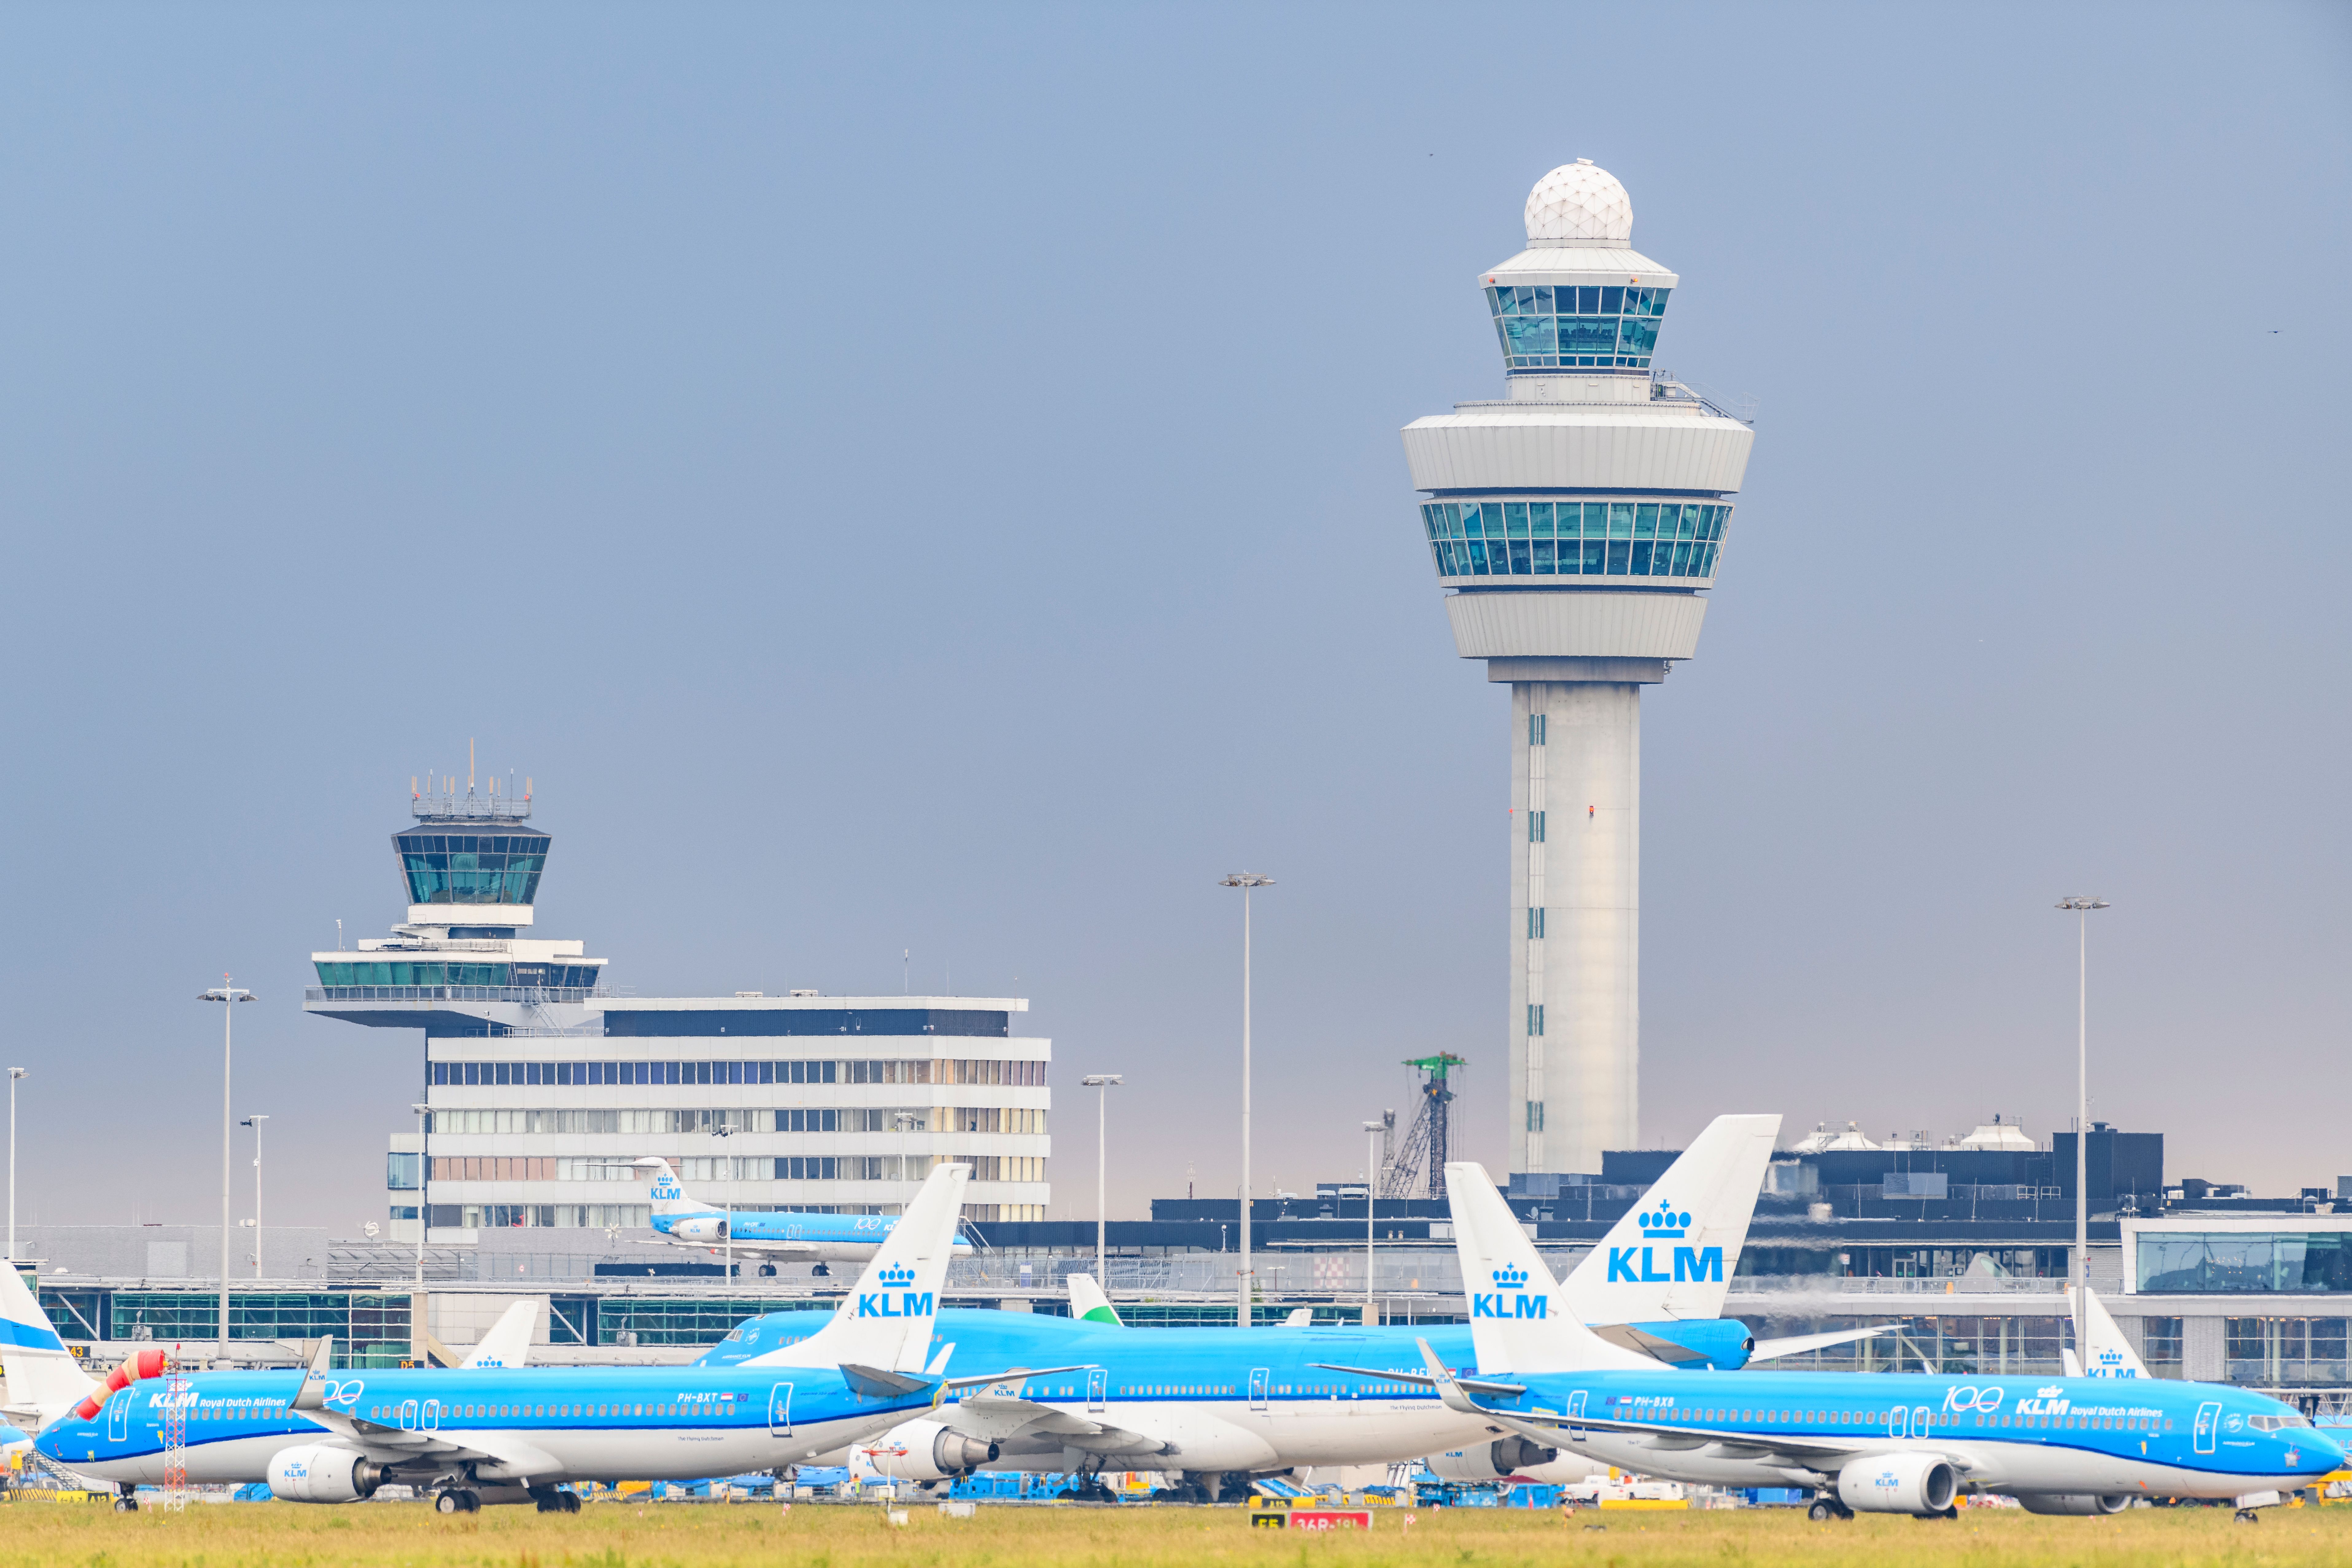 KLM aircraft parked at Schiphol 